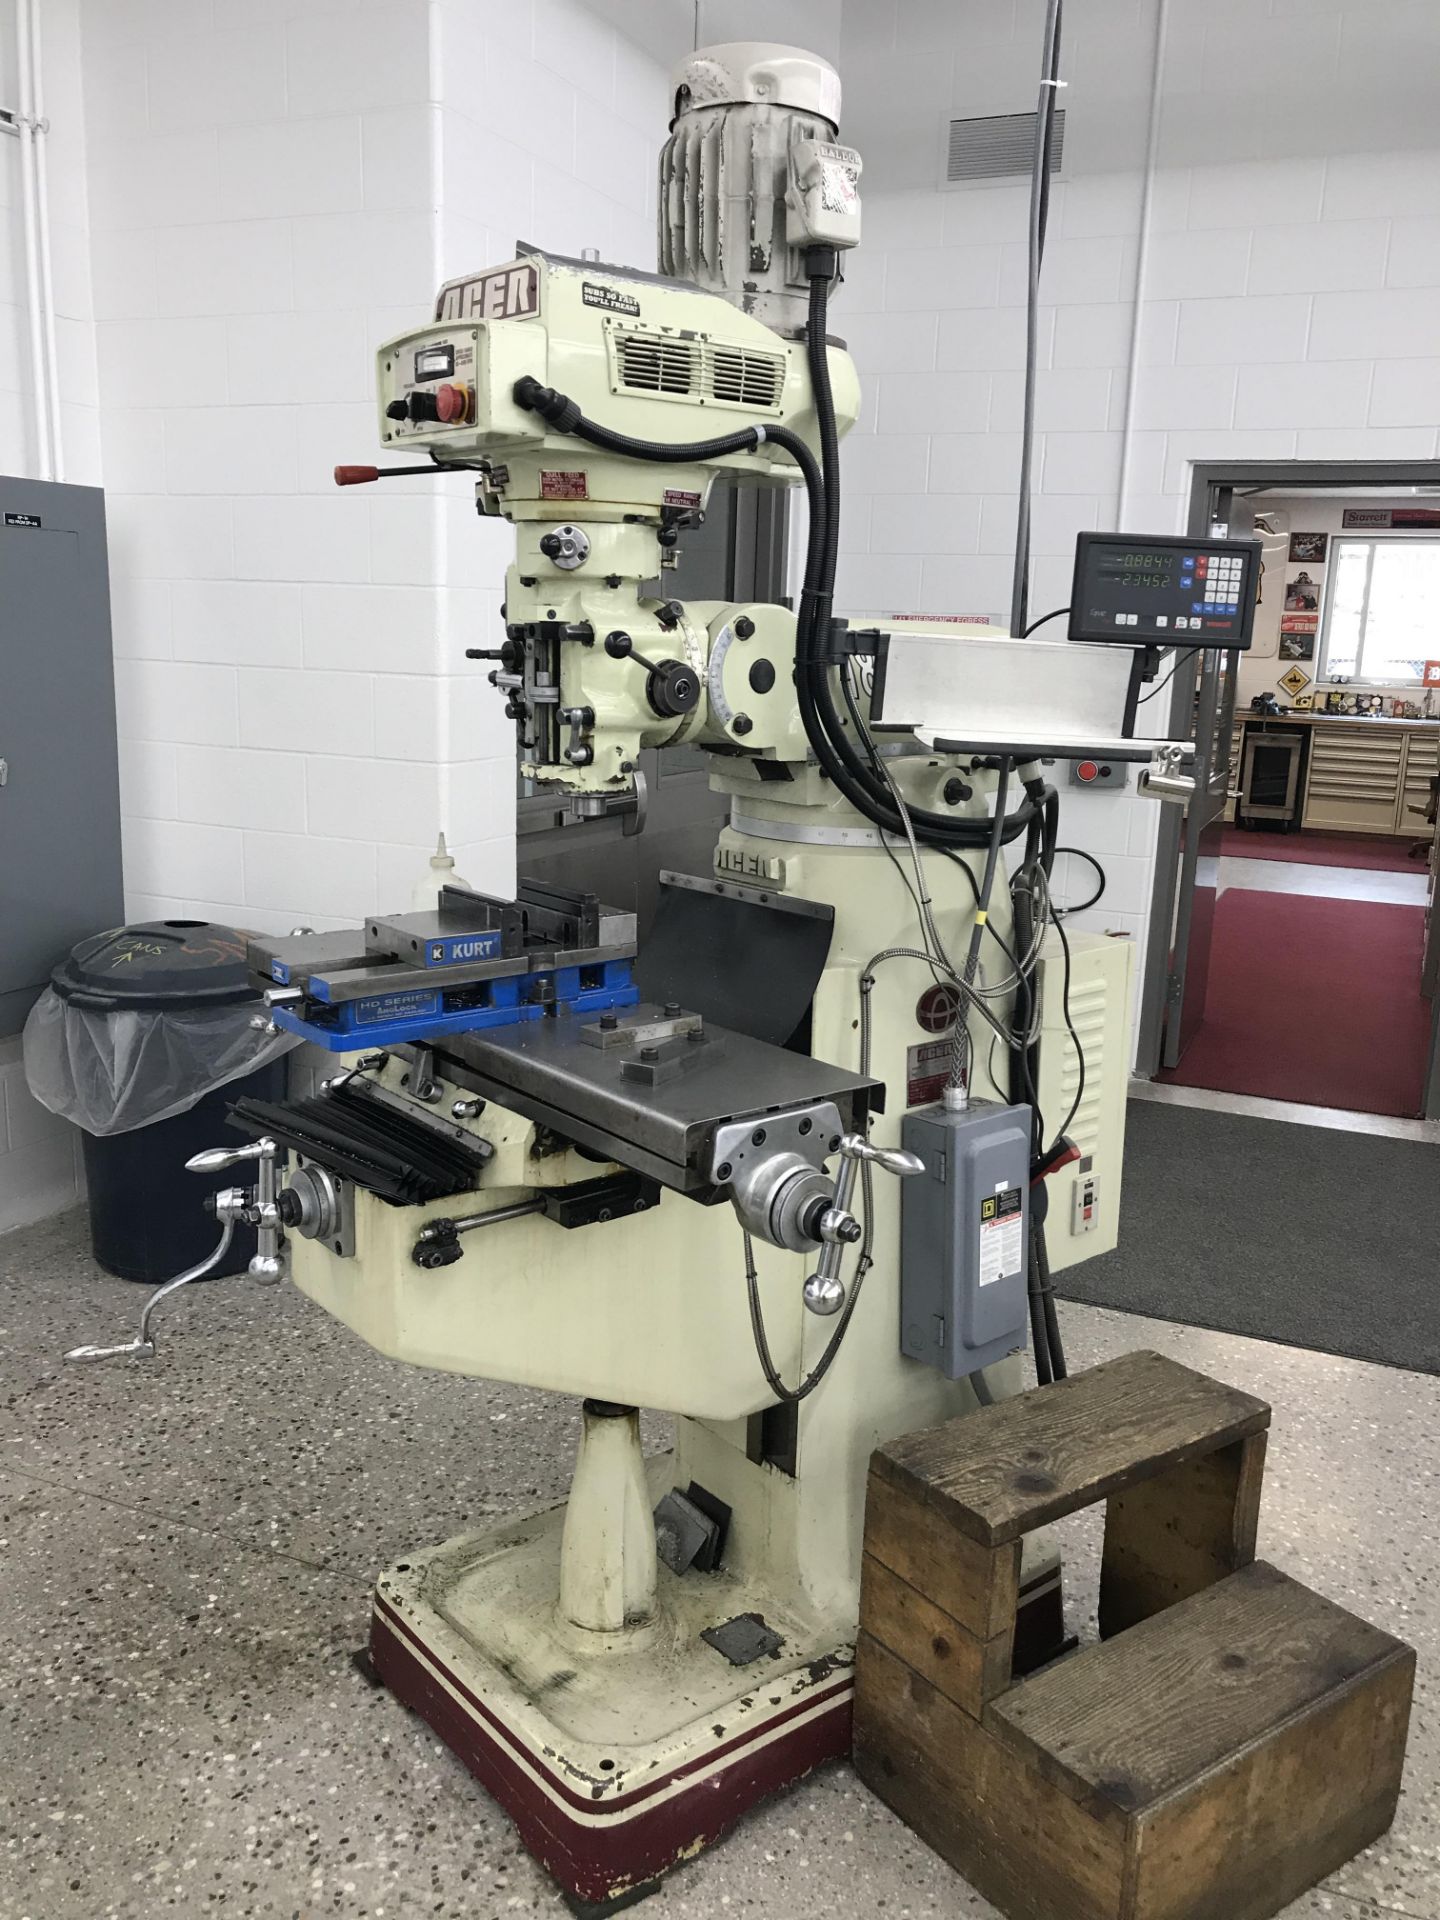 Acer Vertical Milling Machine Model EVS-3VS, 9" x 42" Table, Newall DRO, Collets, 60-4500 RPM